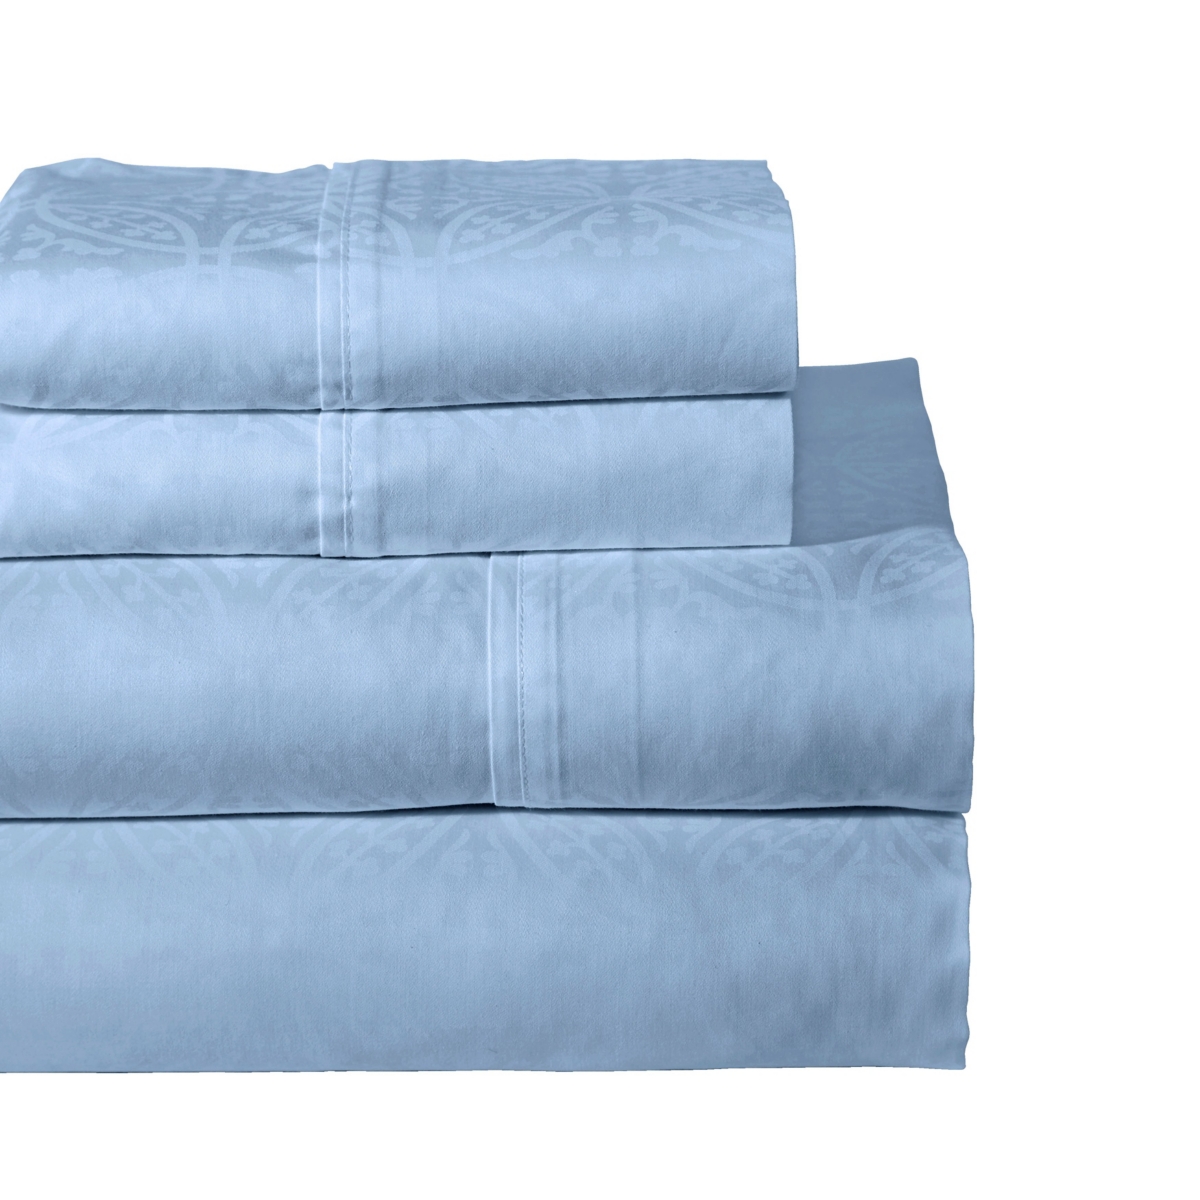 Pointehaven Printed 300 Thread Count Cotton Sateen 4-pc. Sheet Sets, King In Blue